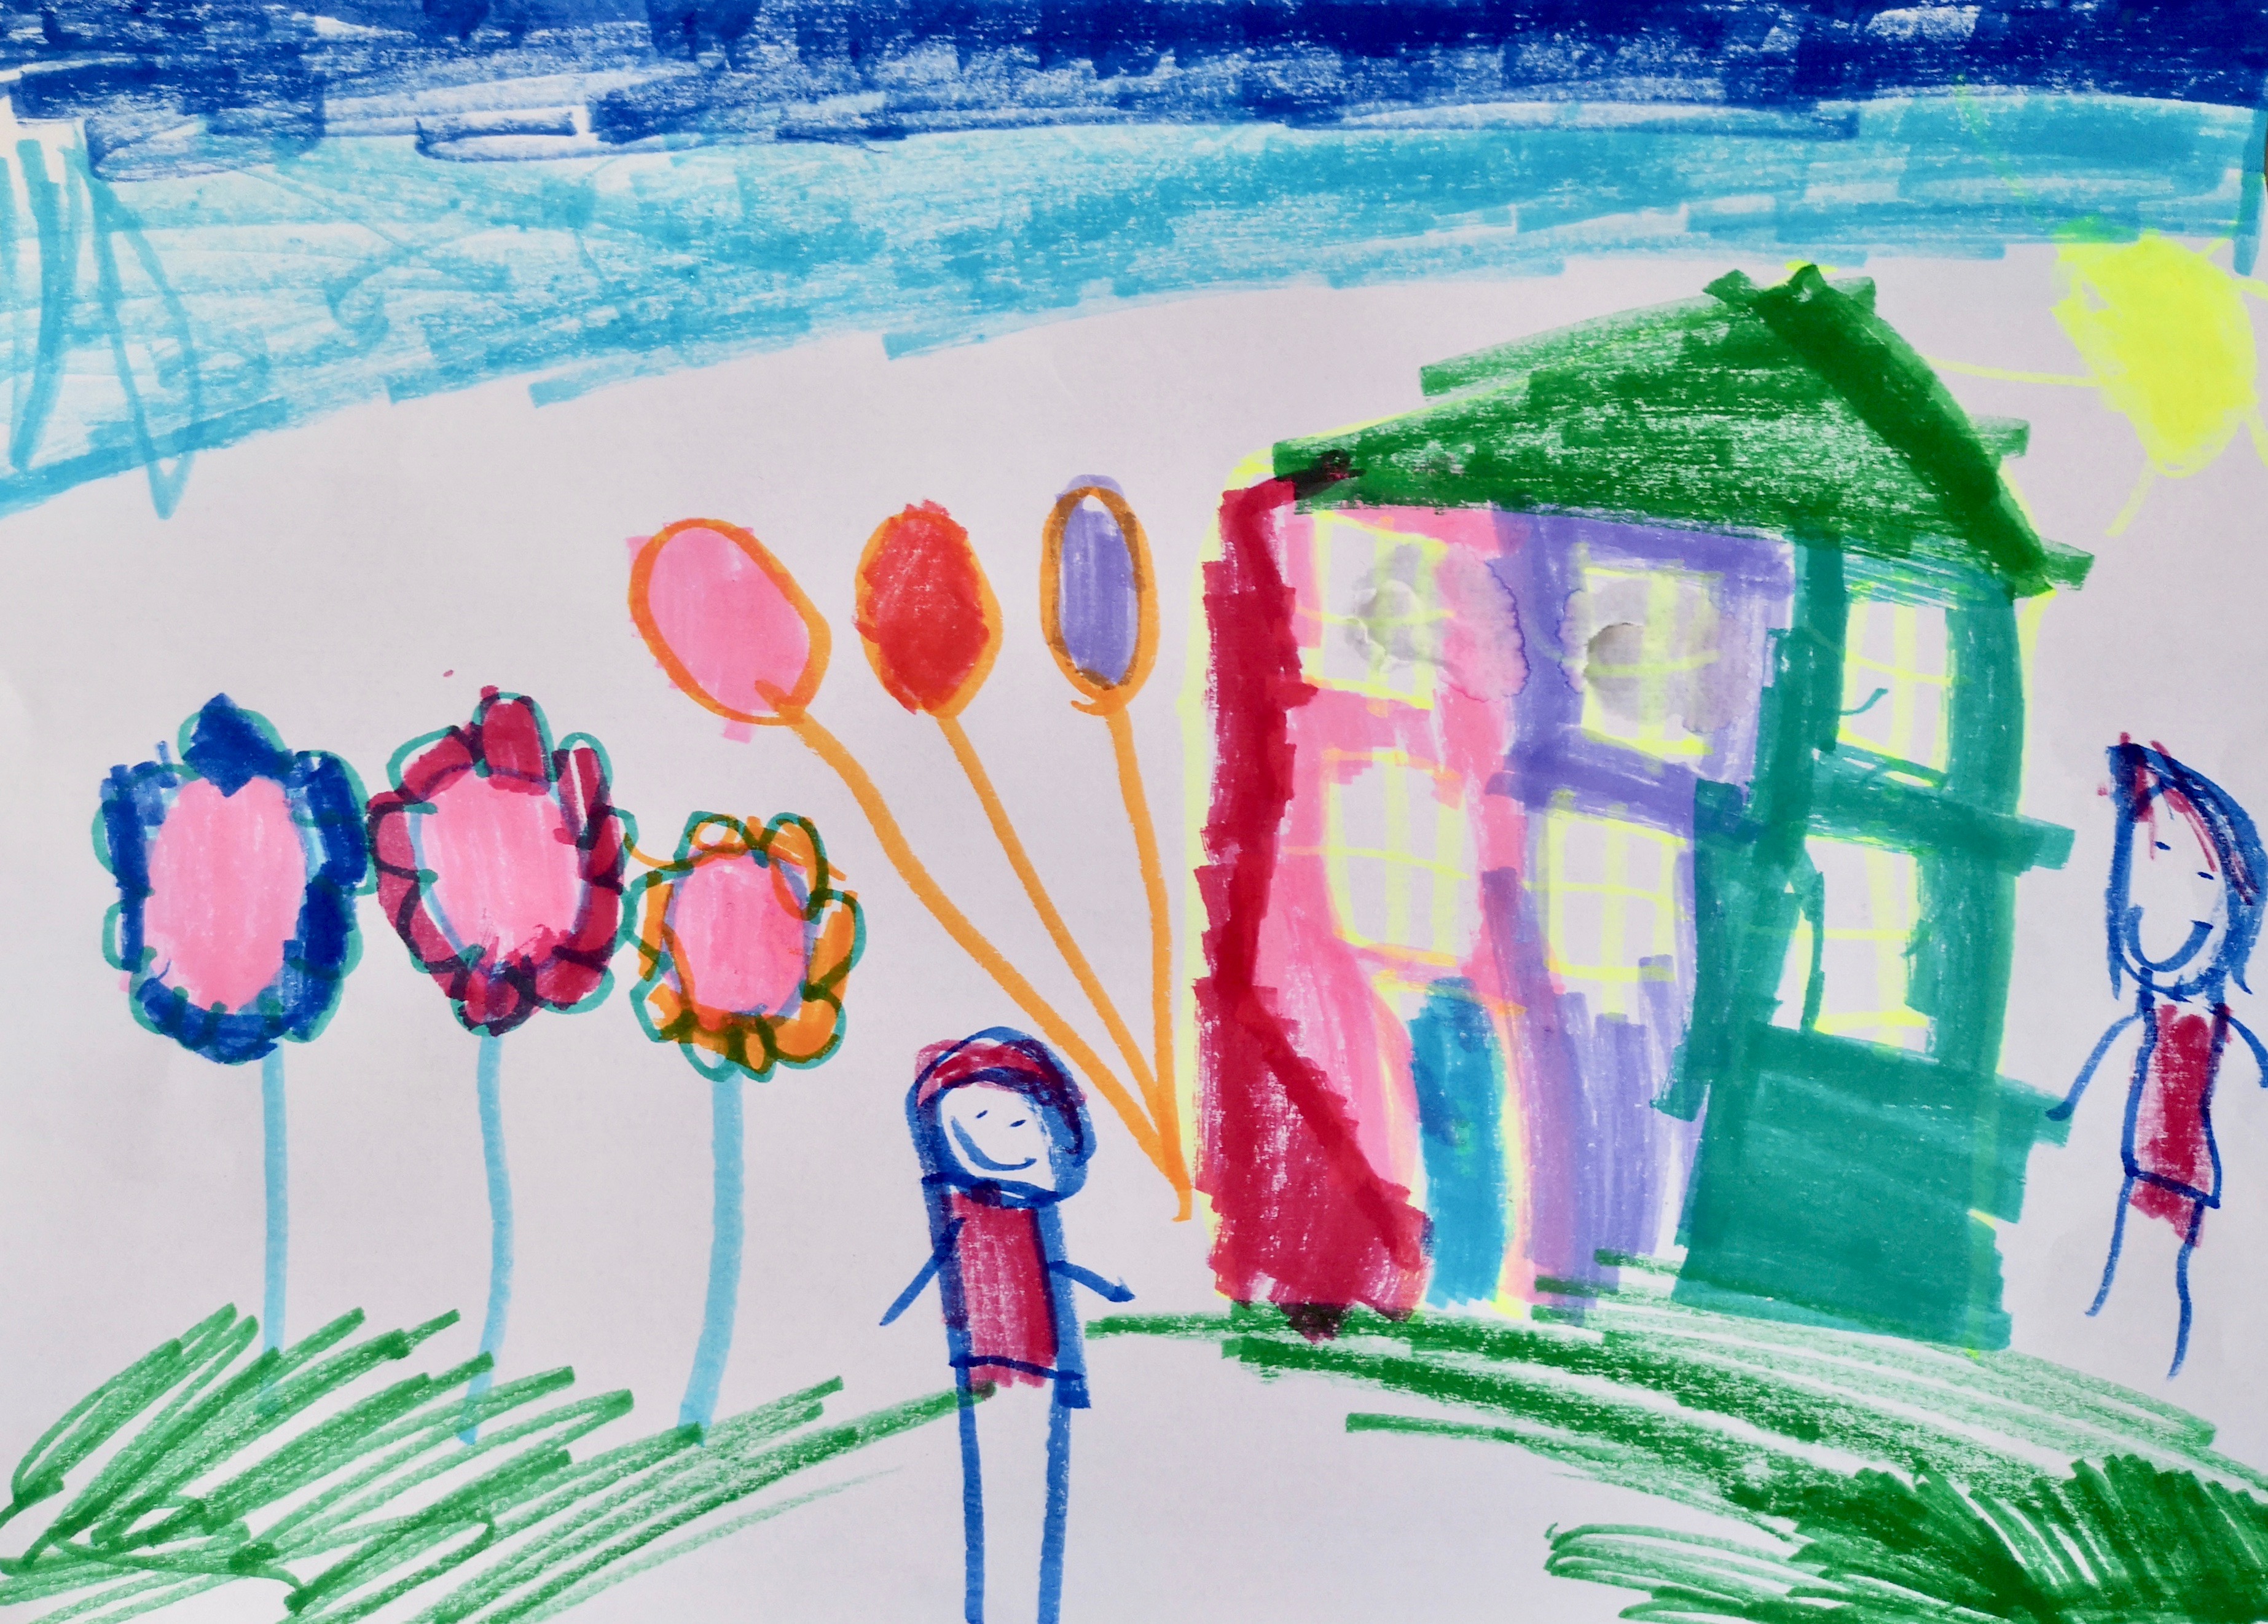 'The Rainbow Garden' by Ruth (6) from Mayo